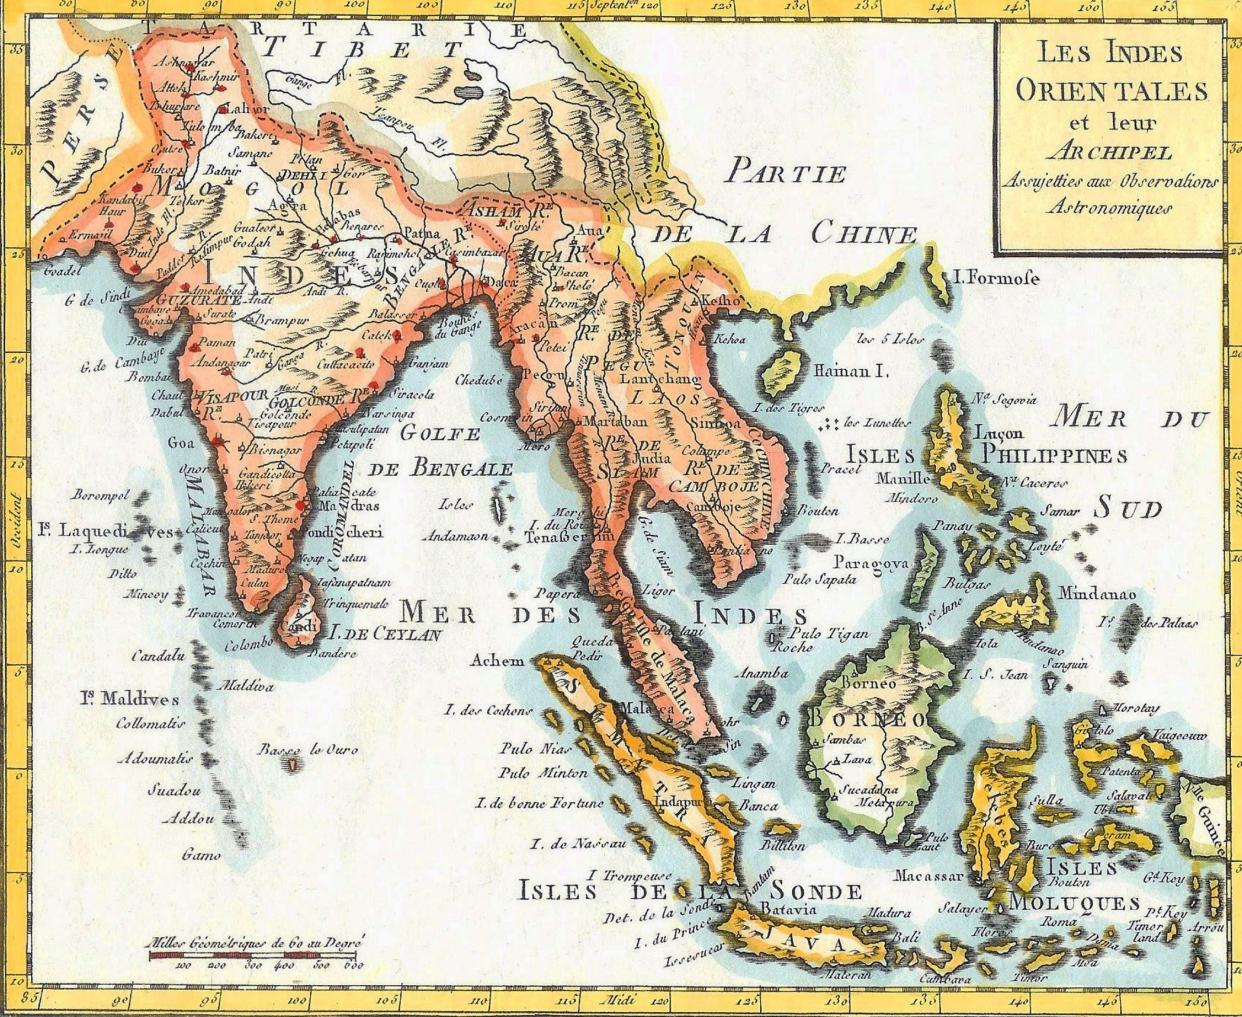 The spice islands, hand-coloured map, 1799